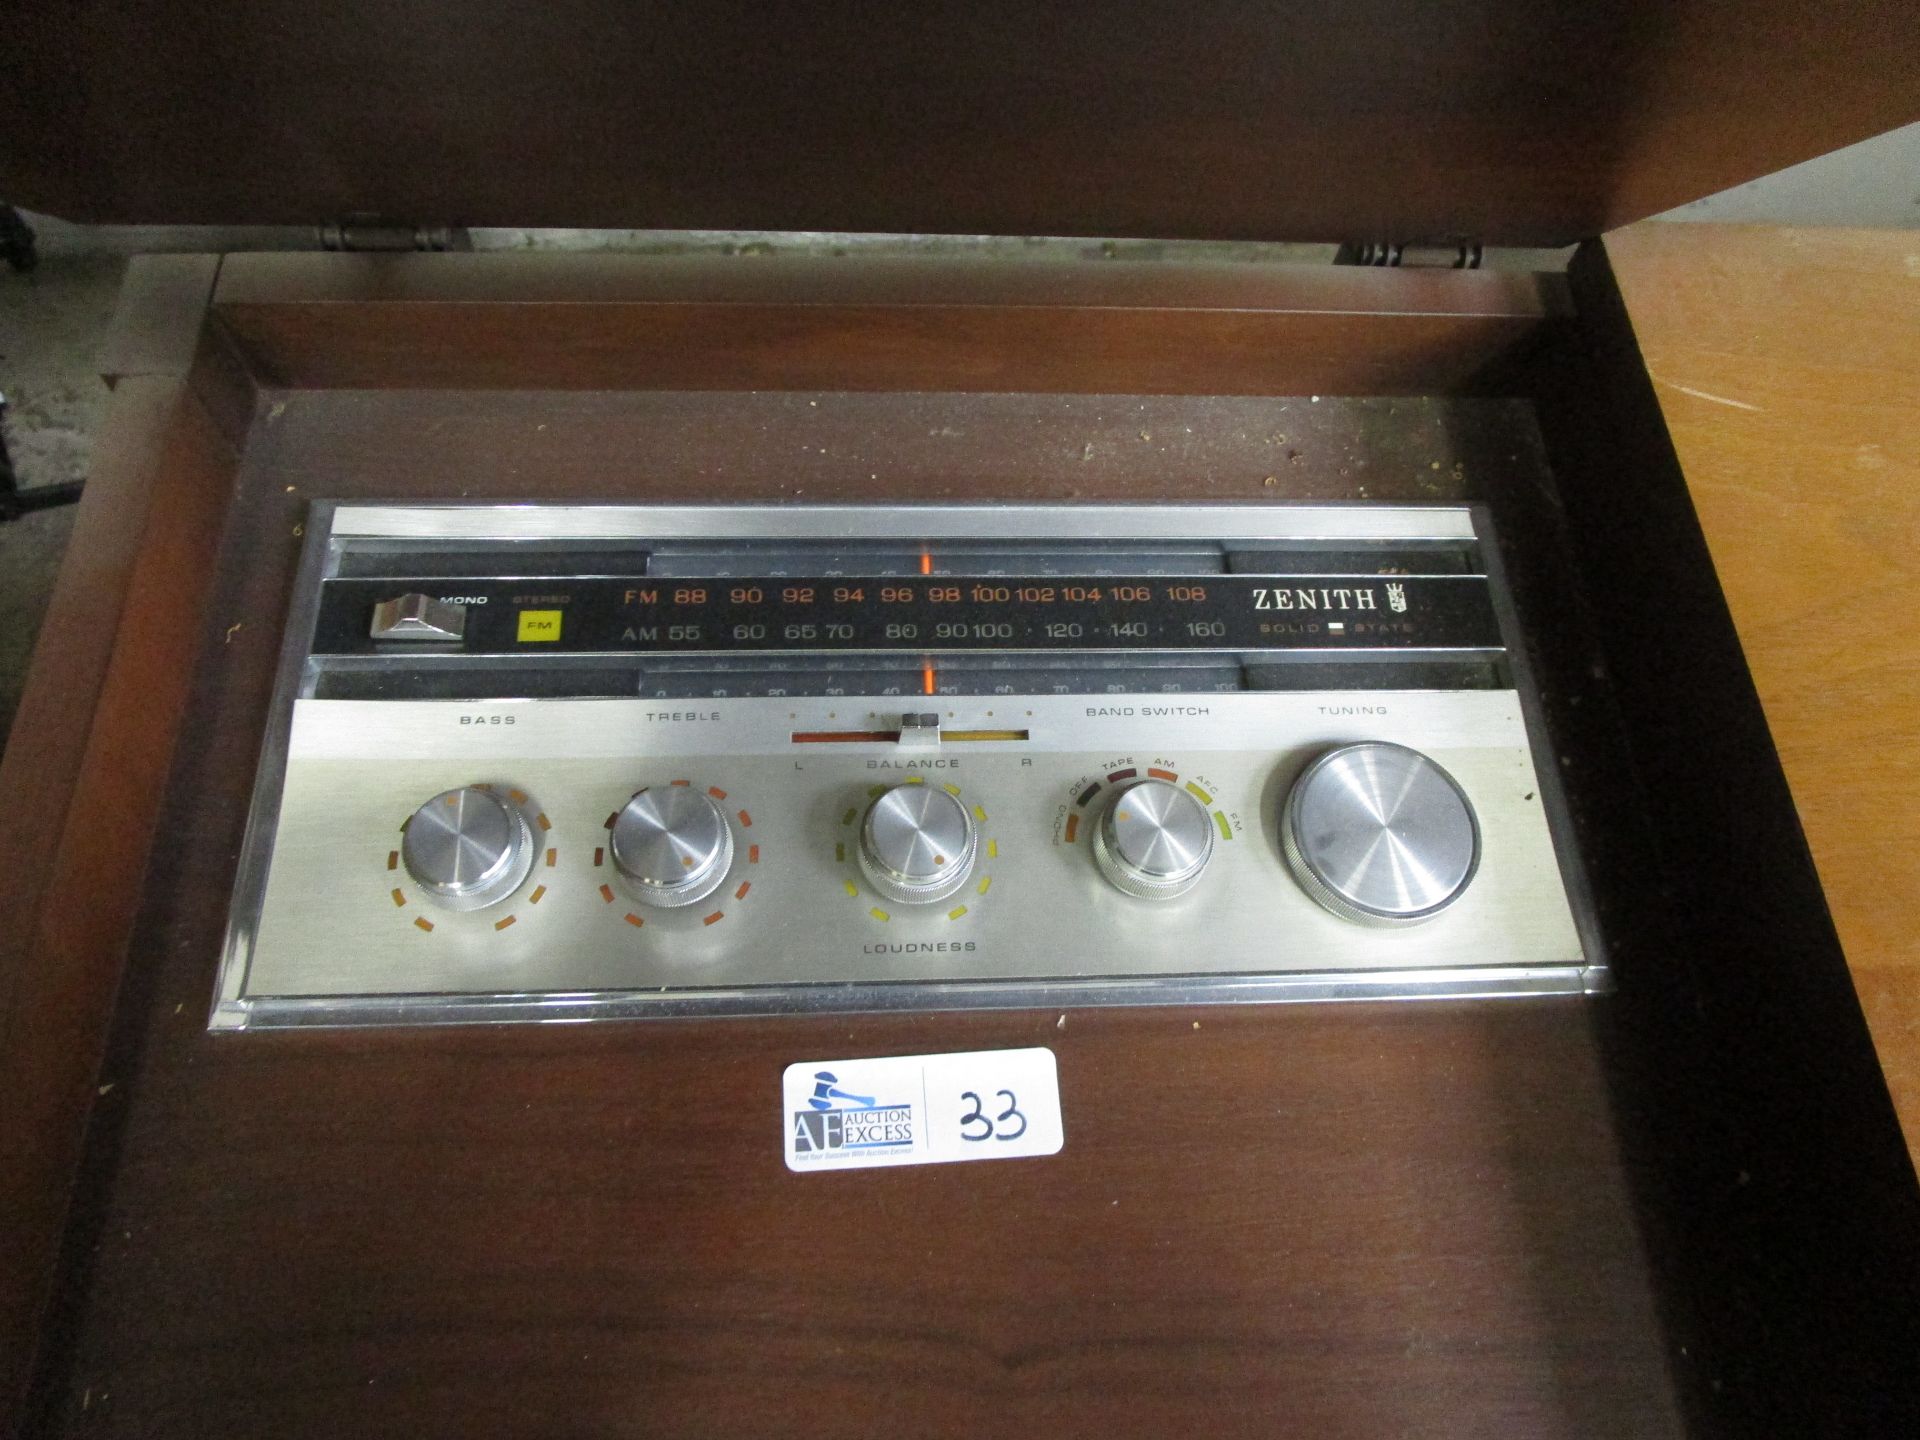 VINTAGE ZENITH AM/FM TV,TURNTABLE CONSOLE - Image 3 of 4